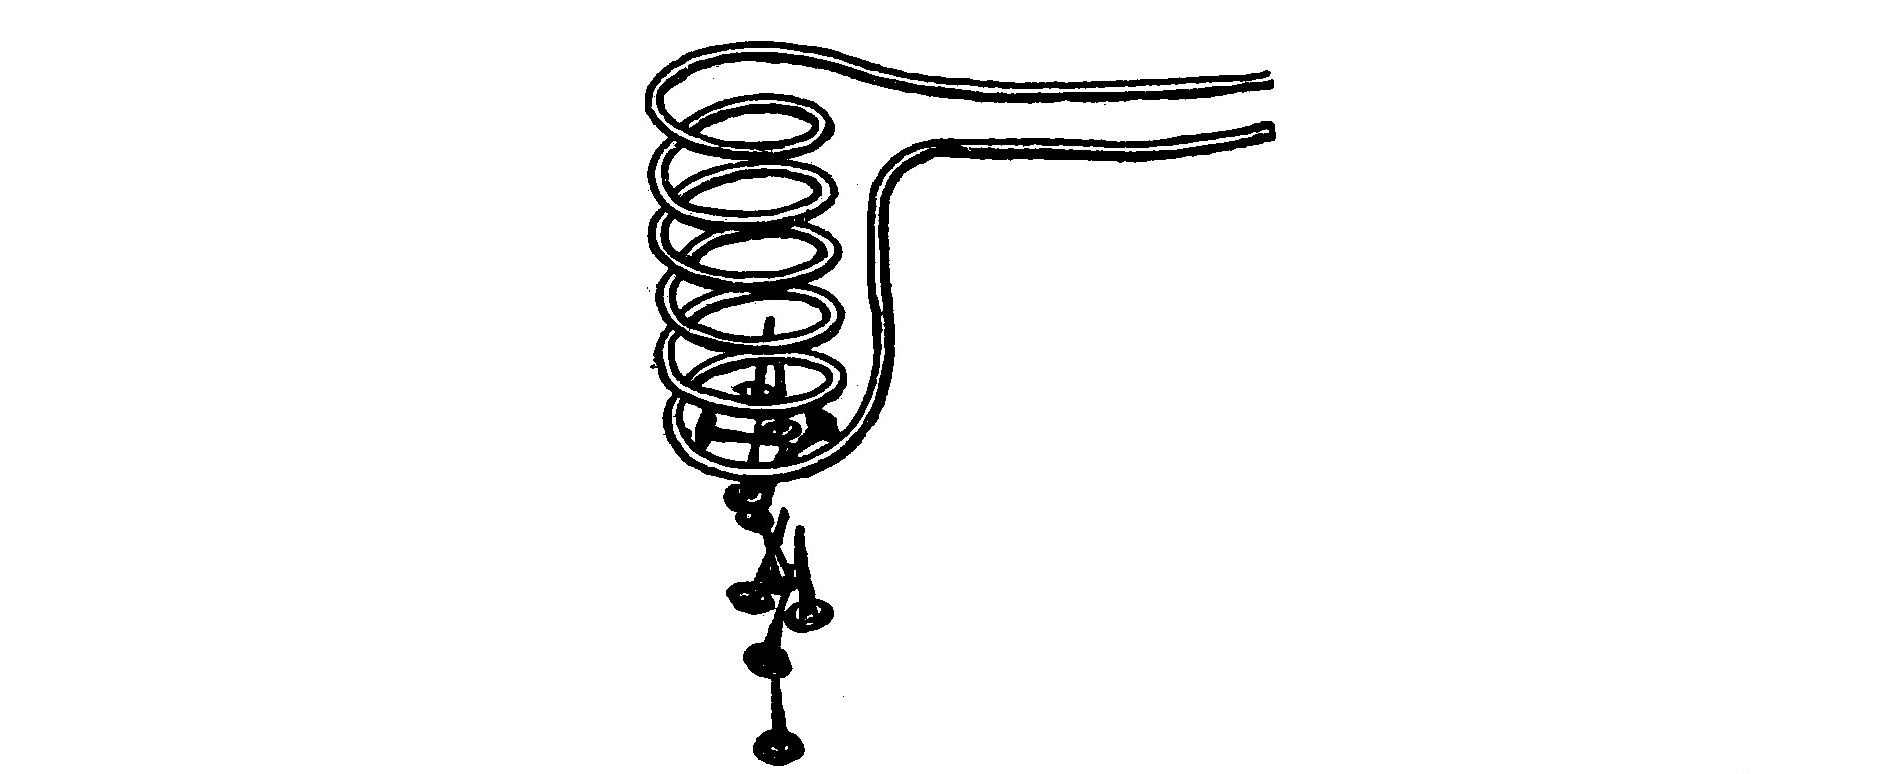 FIG. 3.—By forming the wire into several loops or a spiral so that the effect of the individual turns is concentrated in a small space, an Electromagnet is made.